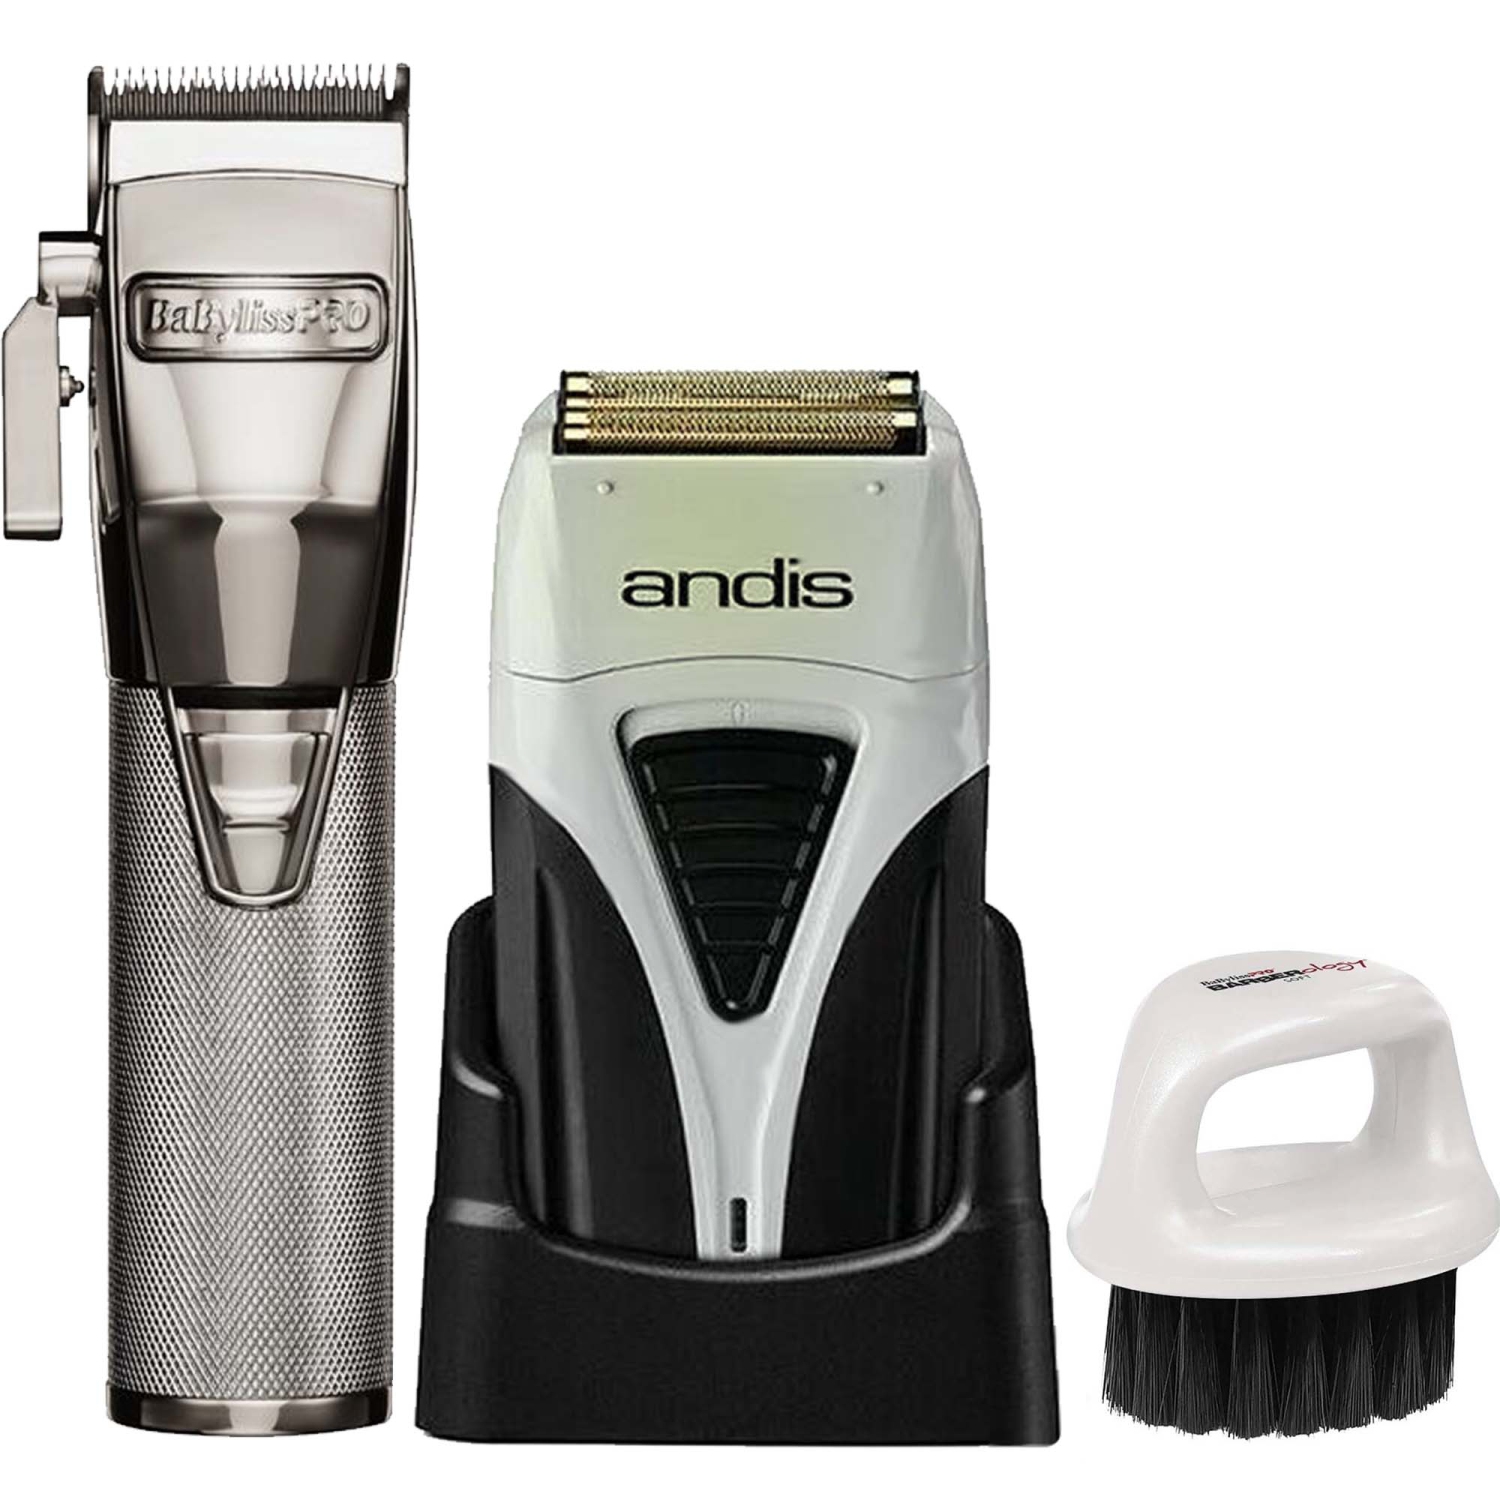 BaByliss PRO FX870S Cordless Clipper Silver with Andis Profoil Foil Shaver Kit